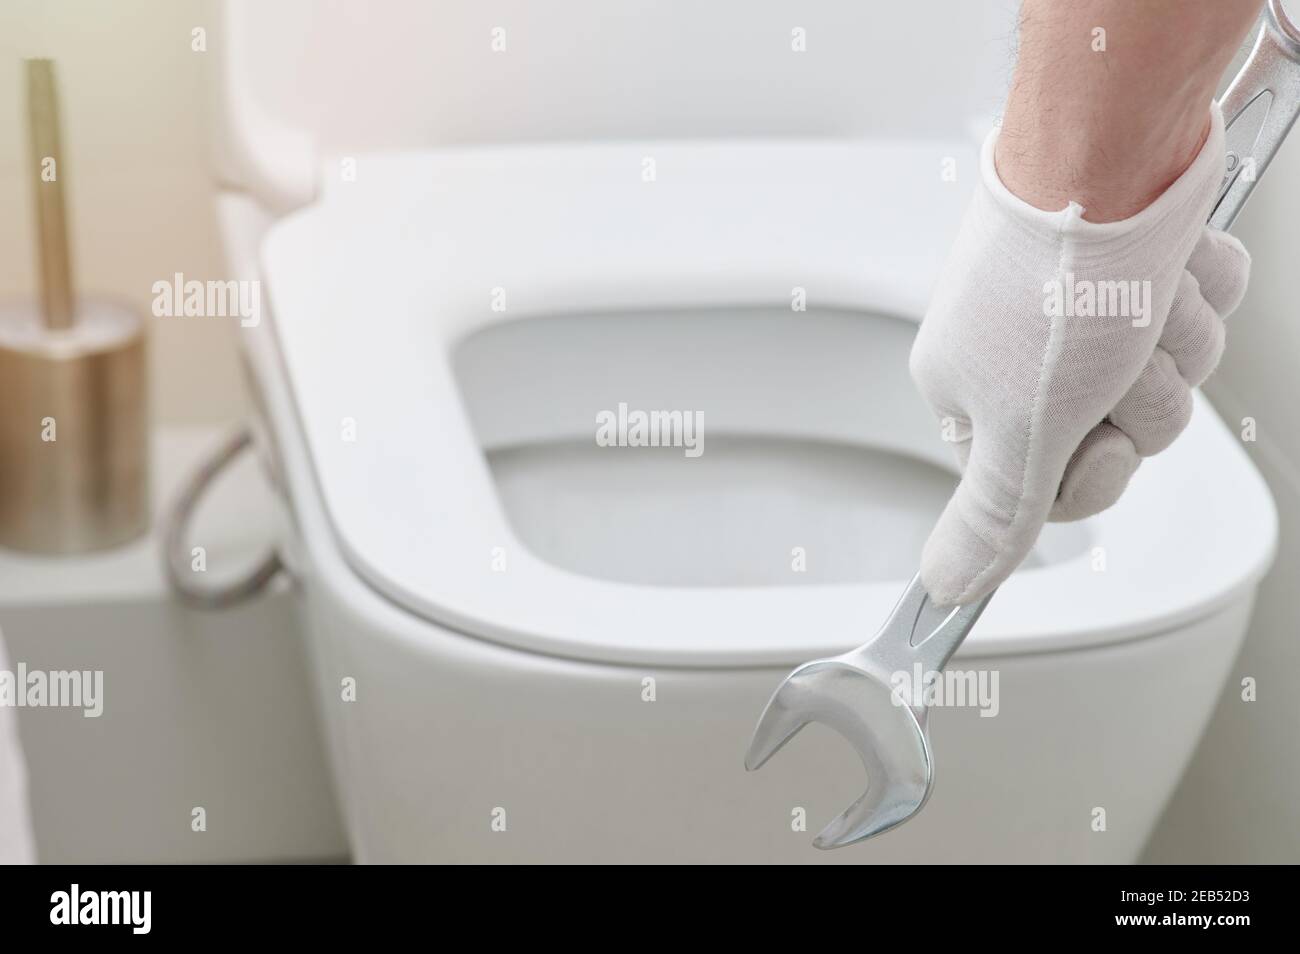 Hand hold wrench tool on toilet seat background Stock Photo